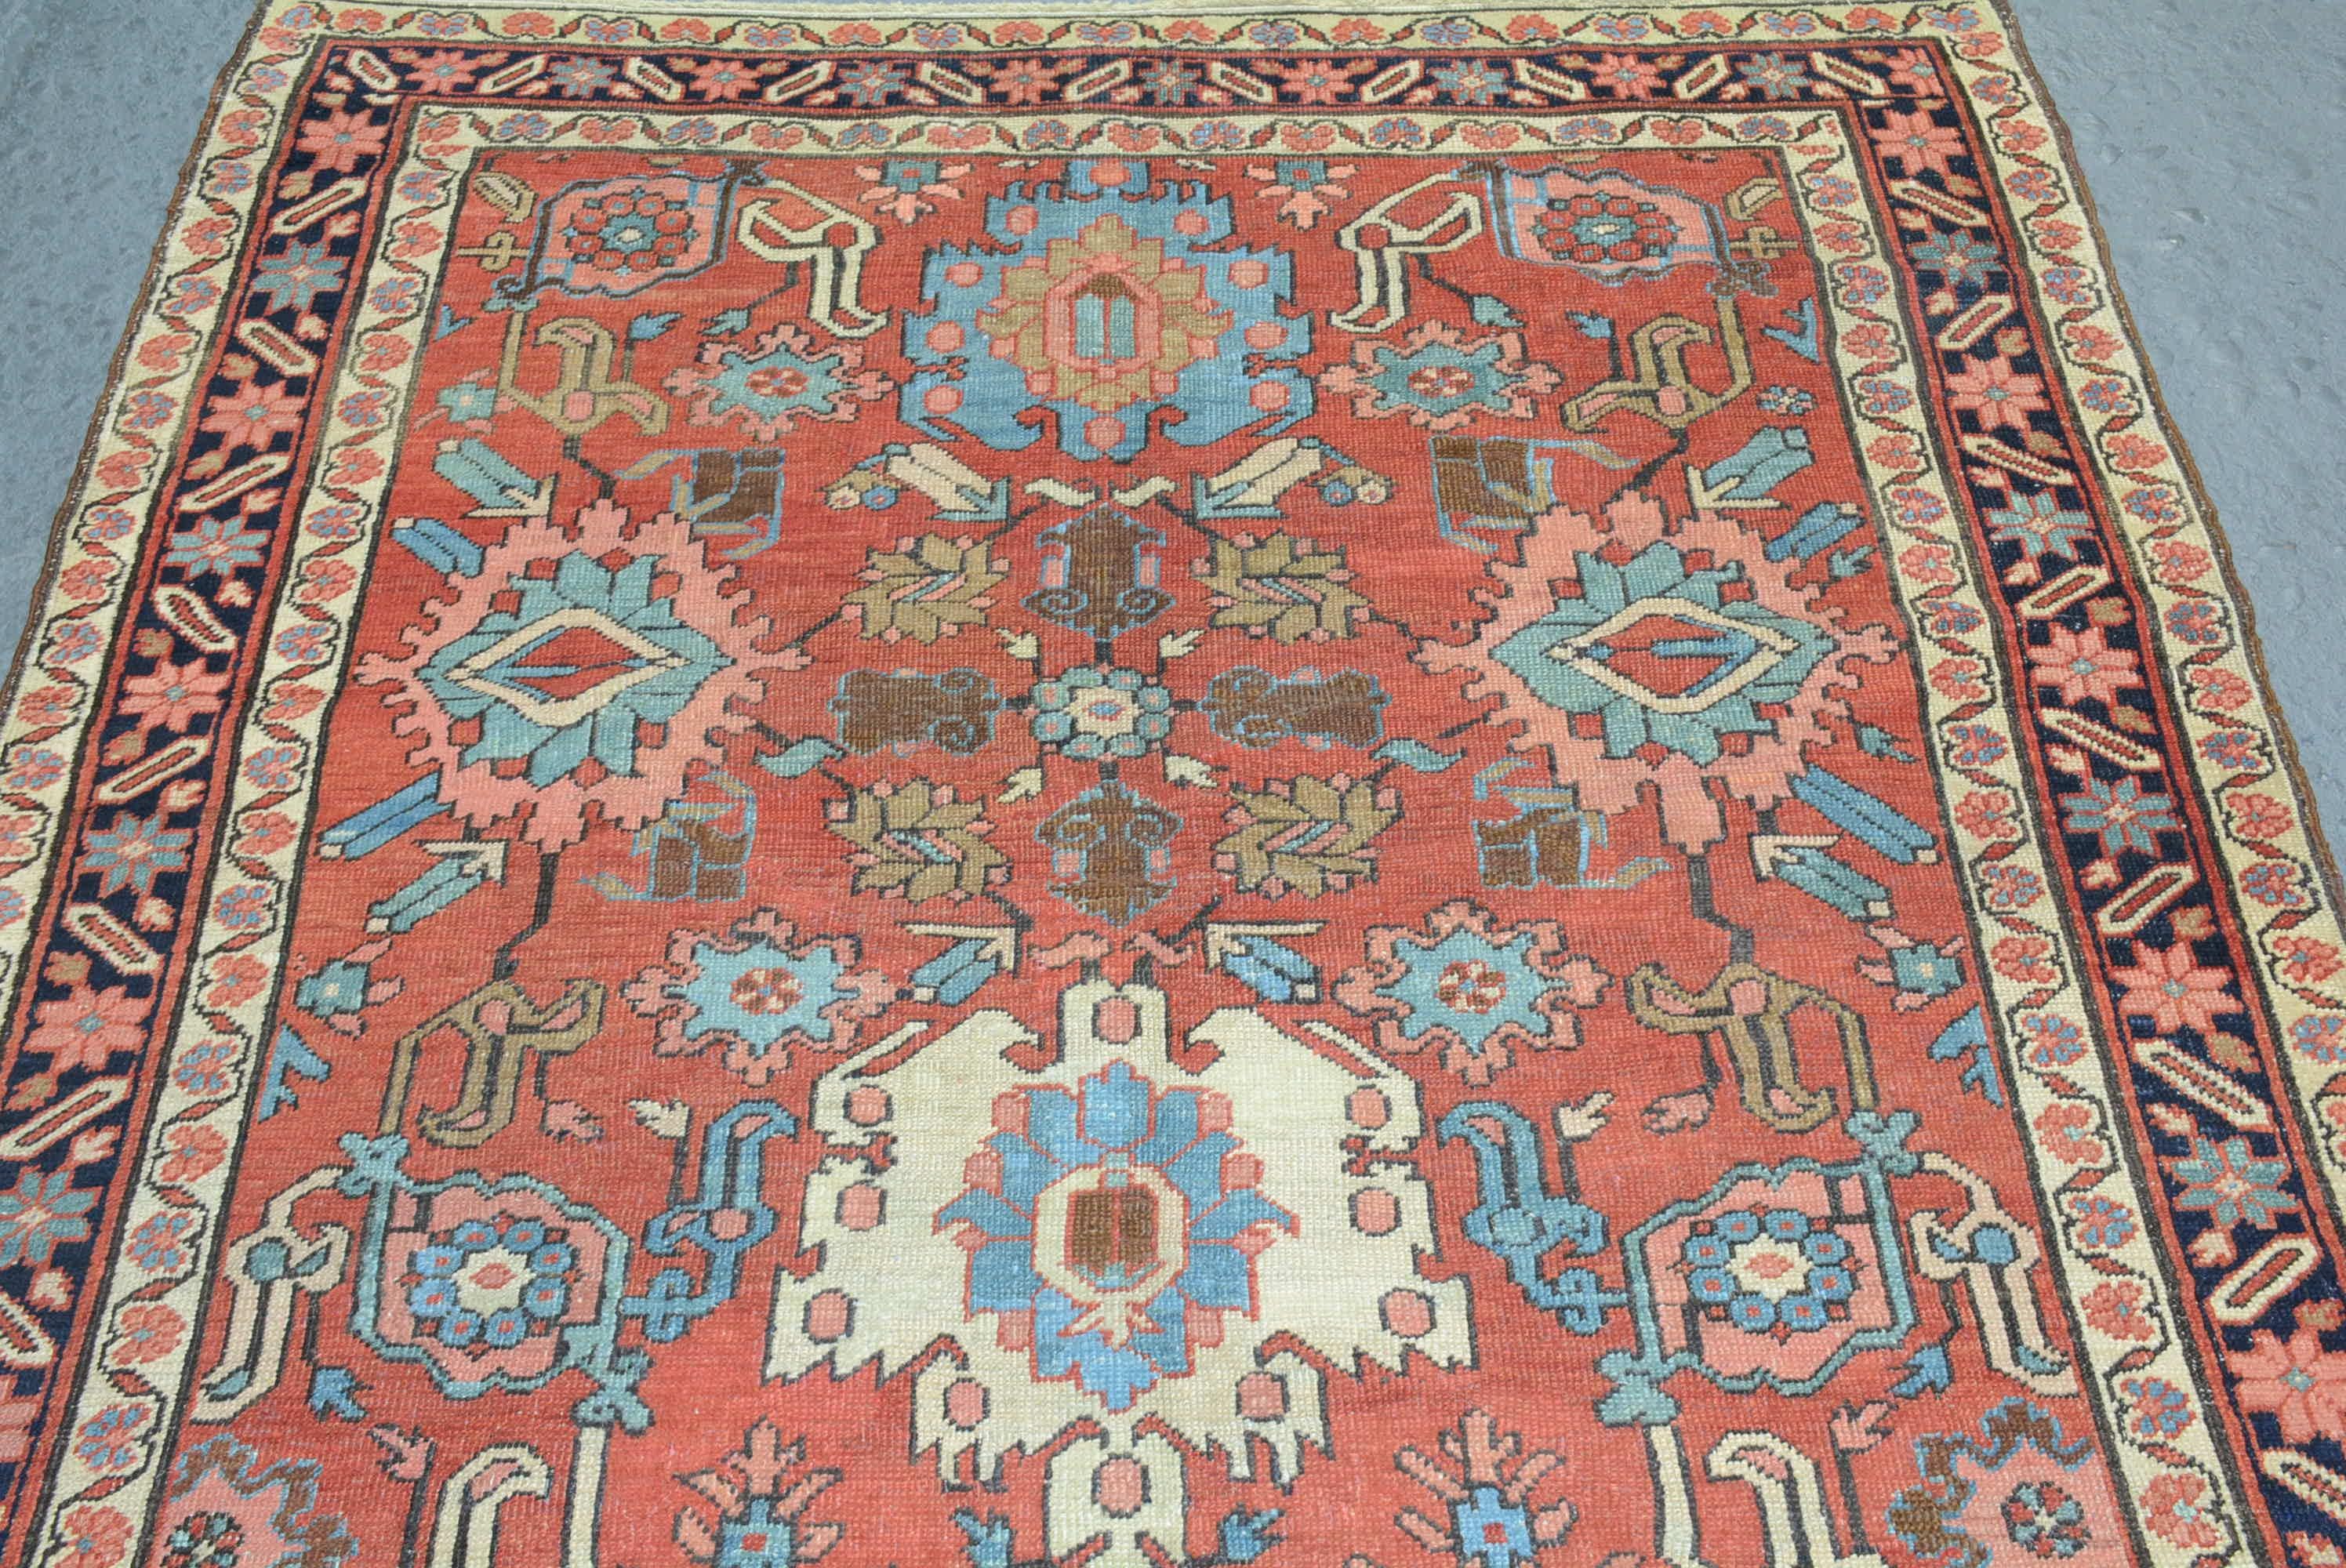 Heriz is a town in northwest Persia (Iran) that has been producing carpets since the 19th century. It is located on Mt. Sabalan, a major source of copper, whose summit is 15,784 feet. The grade of wool used in these carpets is amongst the best, a